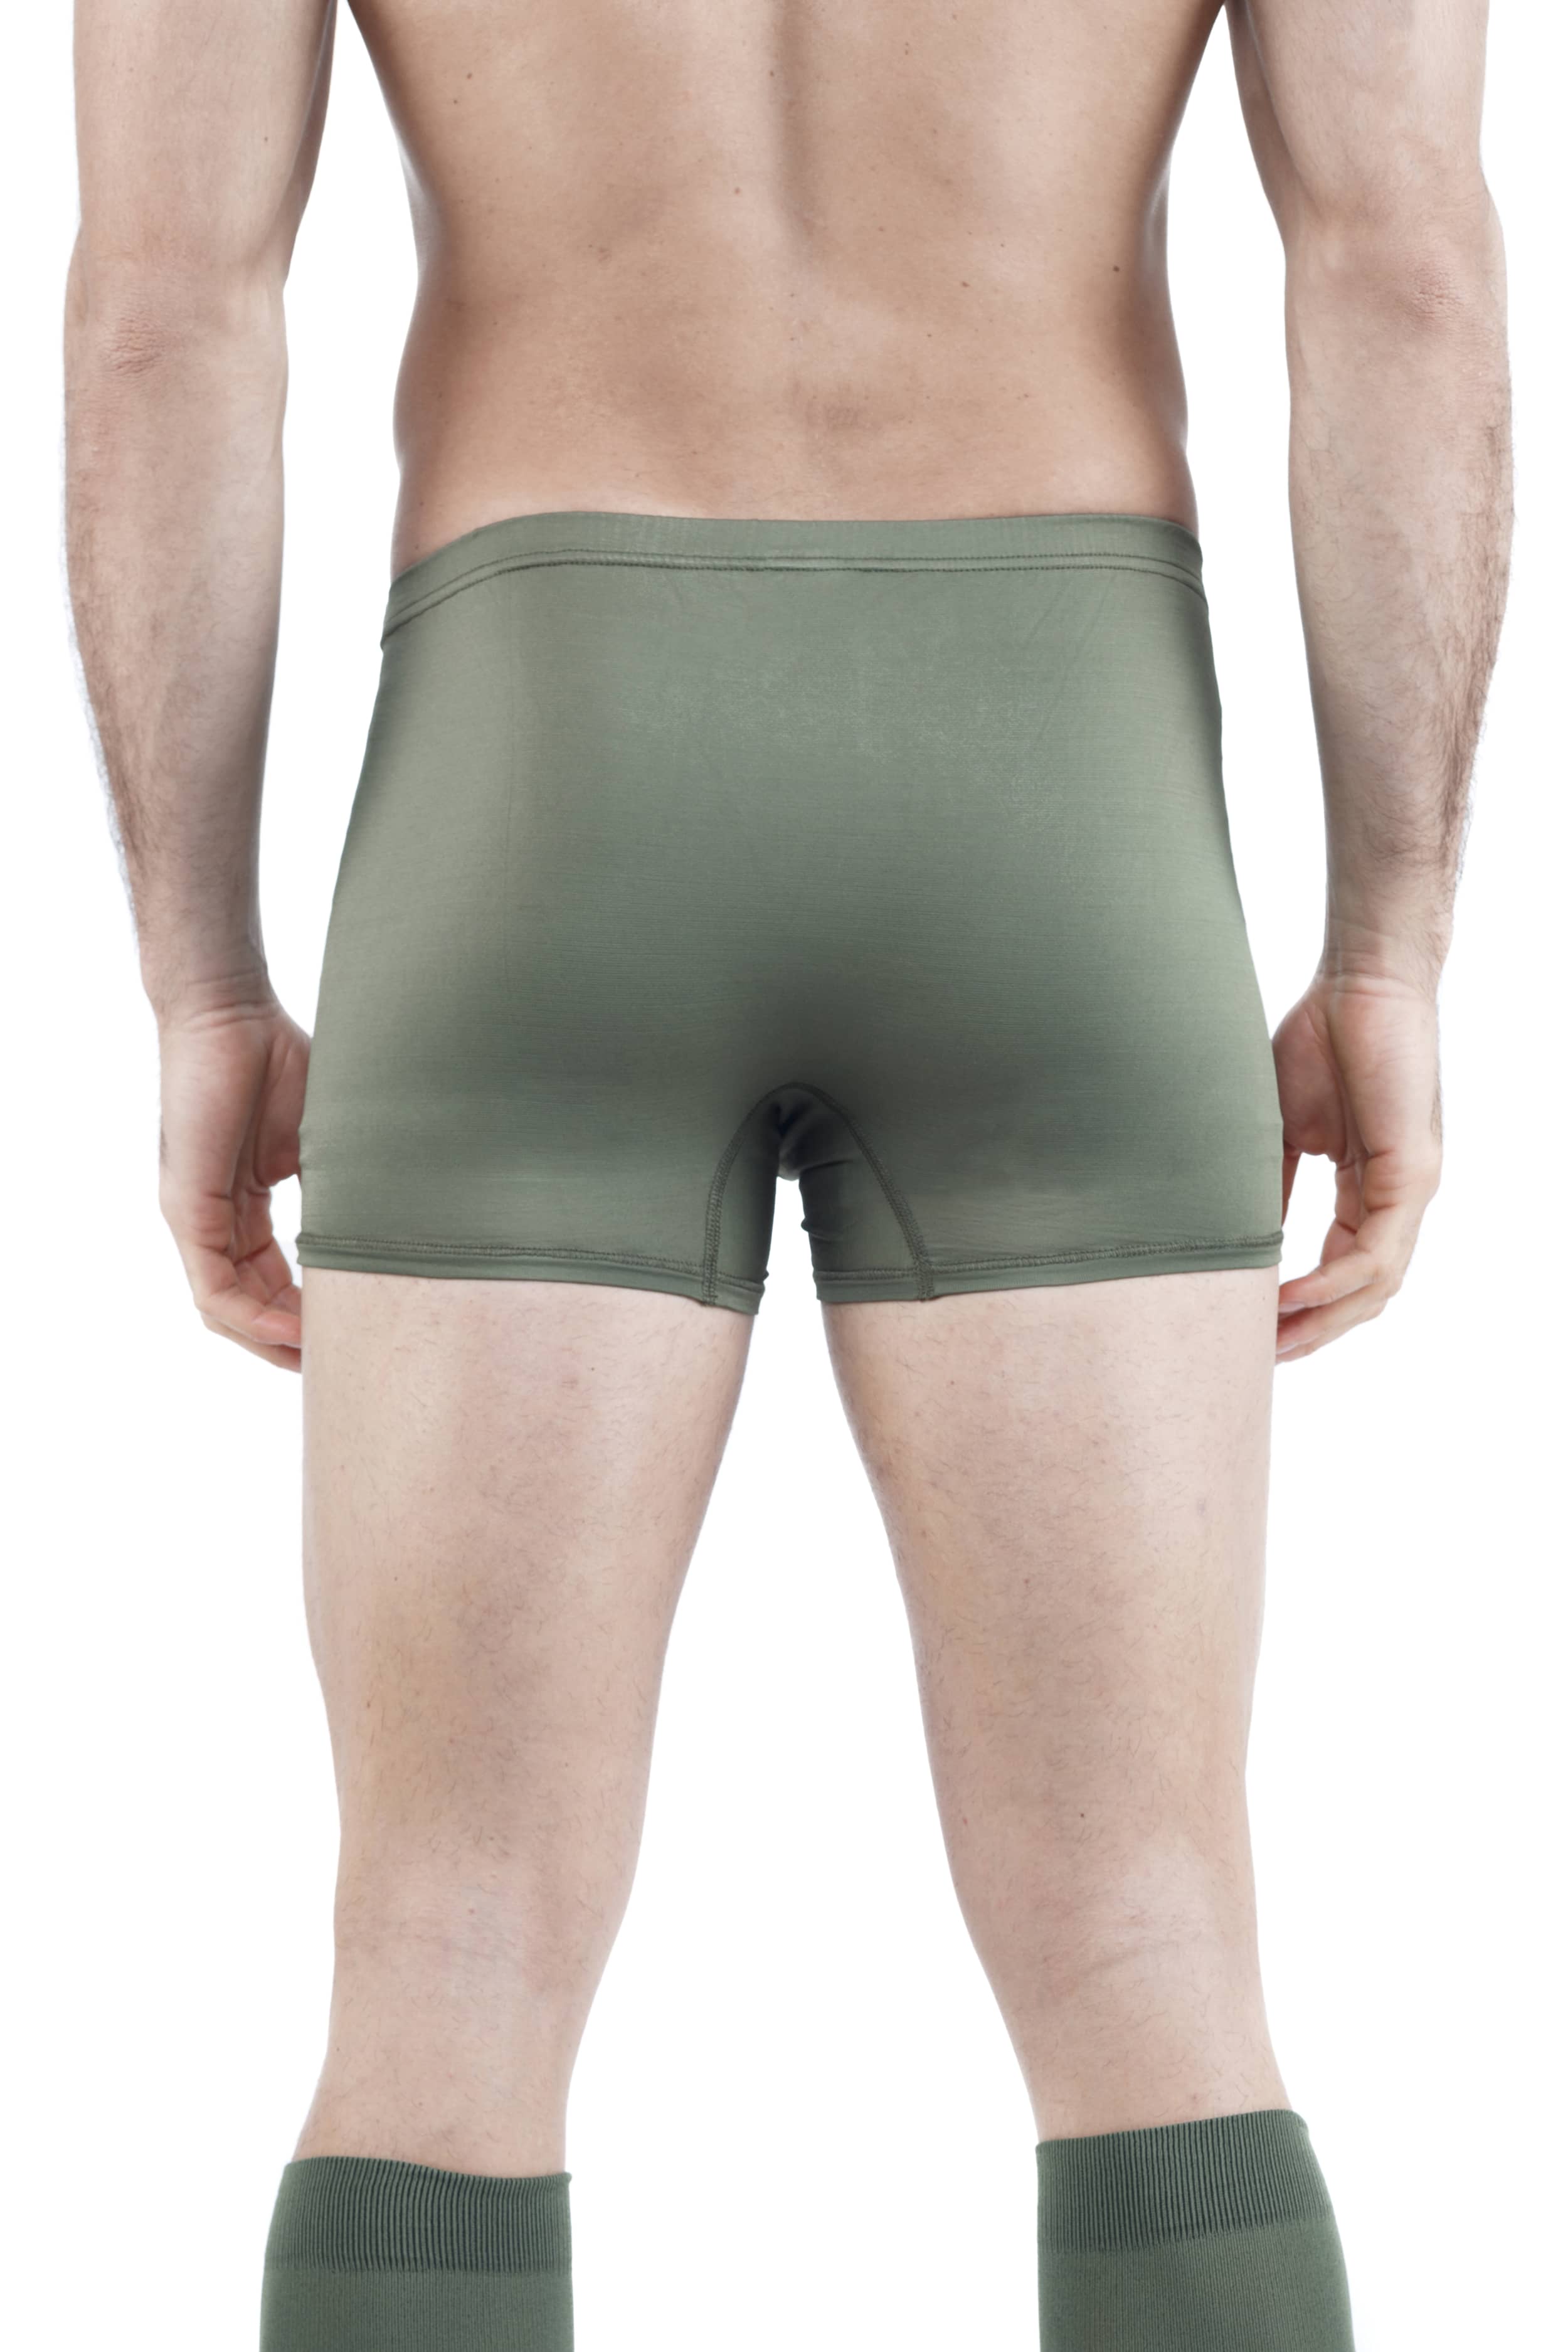 ARMY FIREPROOF COMBAT BOXER SHORTS